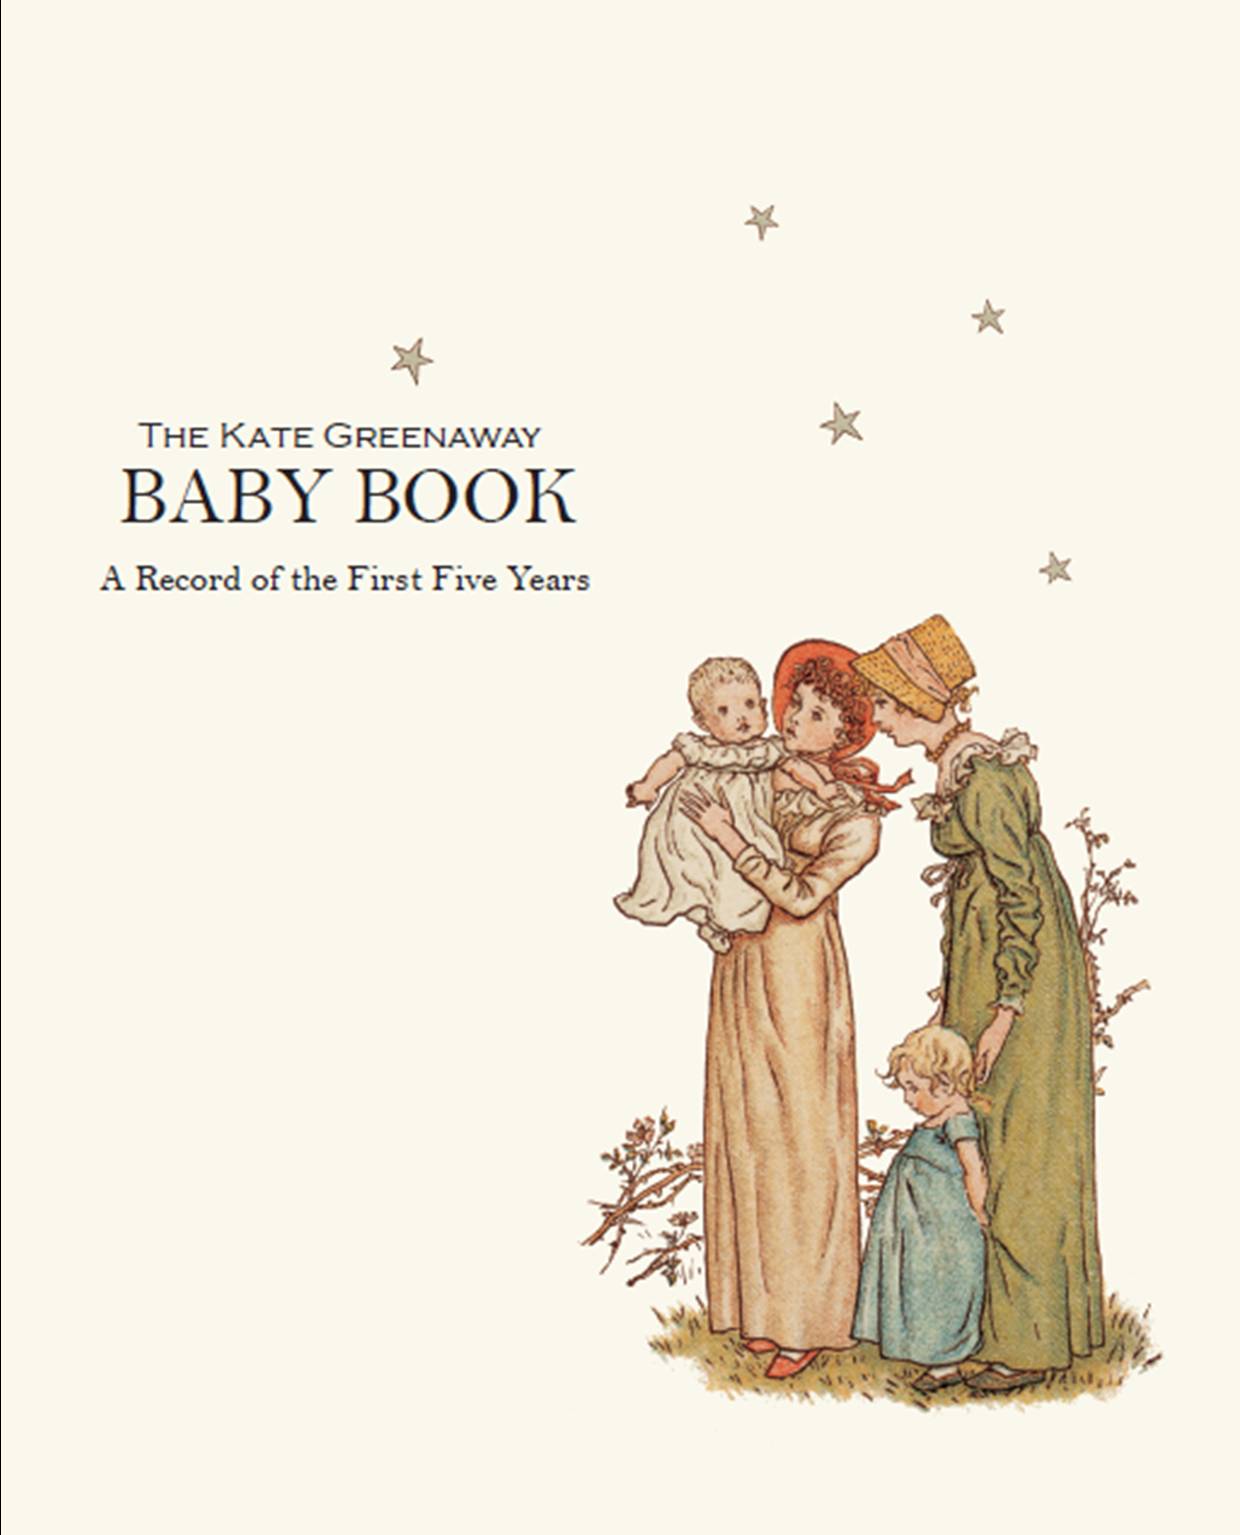 Front cover of The Kate Greenaway Baby Book with a mother holding a baby.